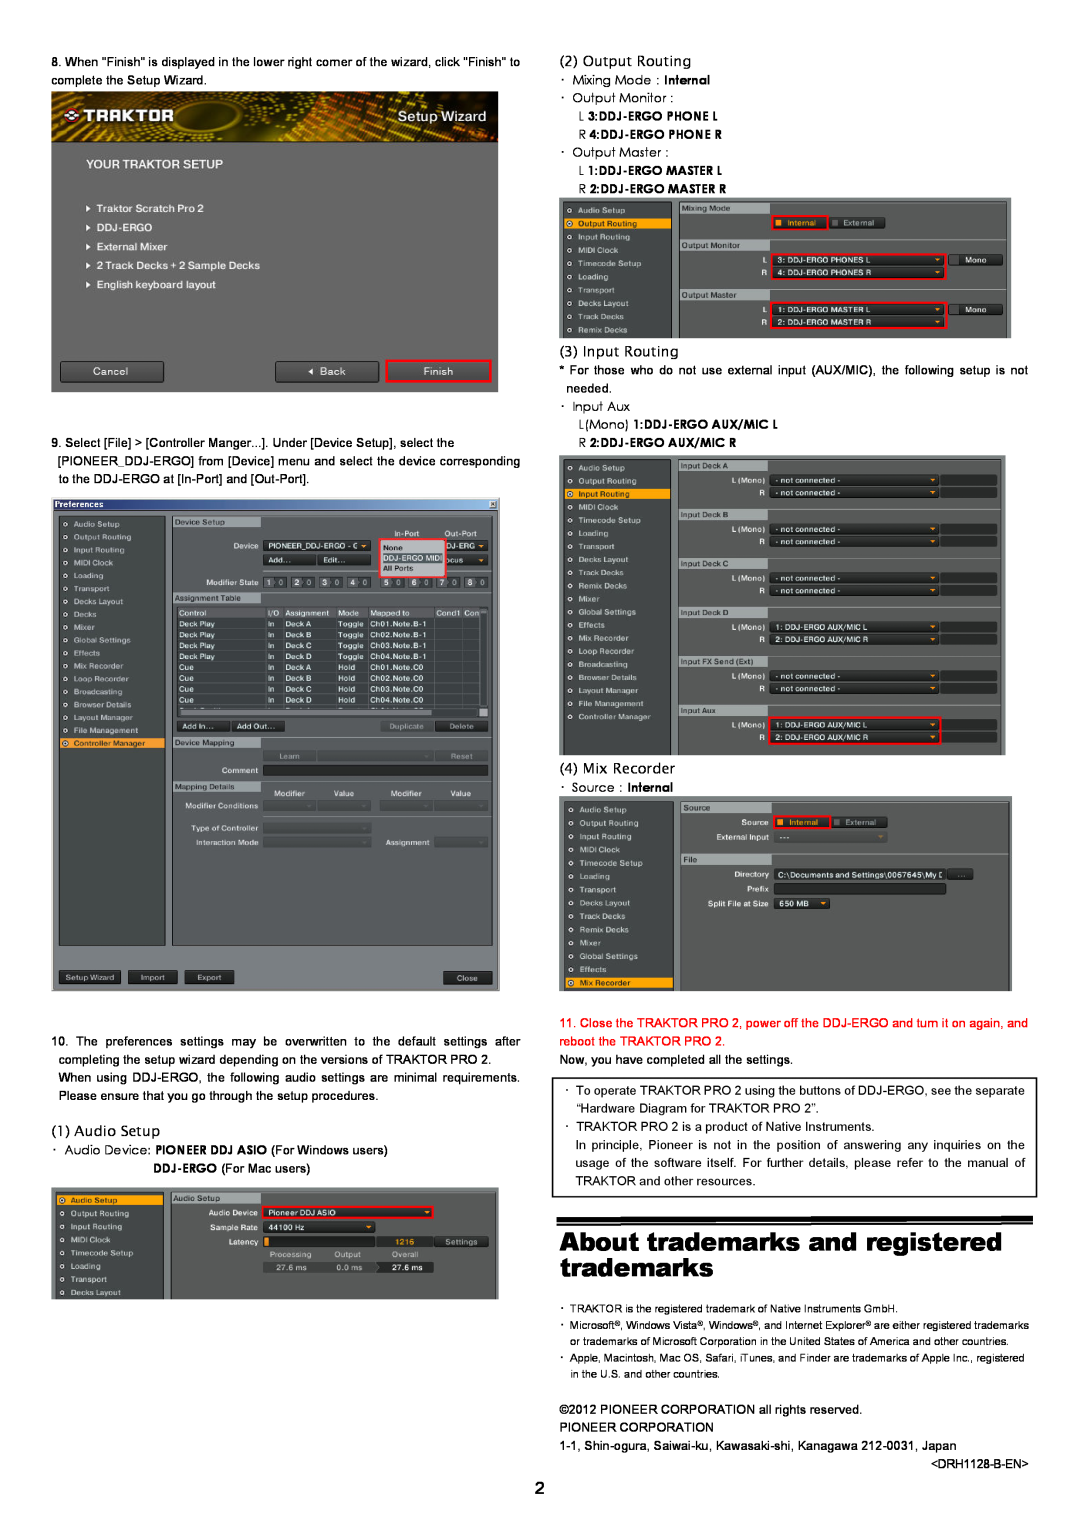 Pioneer ERGO About trademarks and registered trademarks, Output Routing, Input Routing, Mix Recorder, Audio Setup 